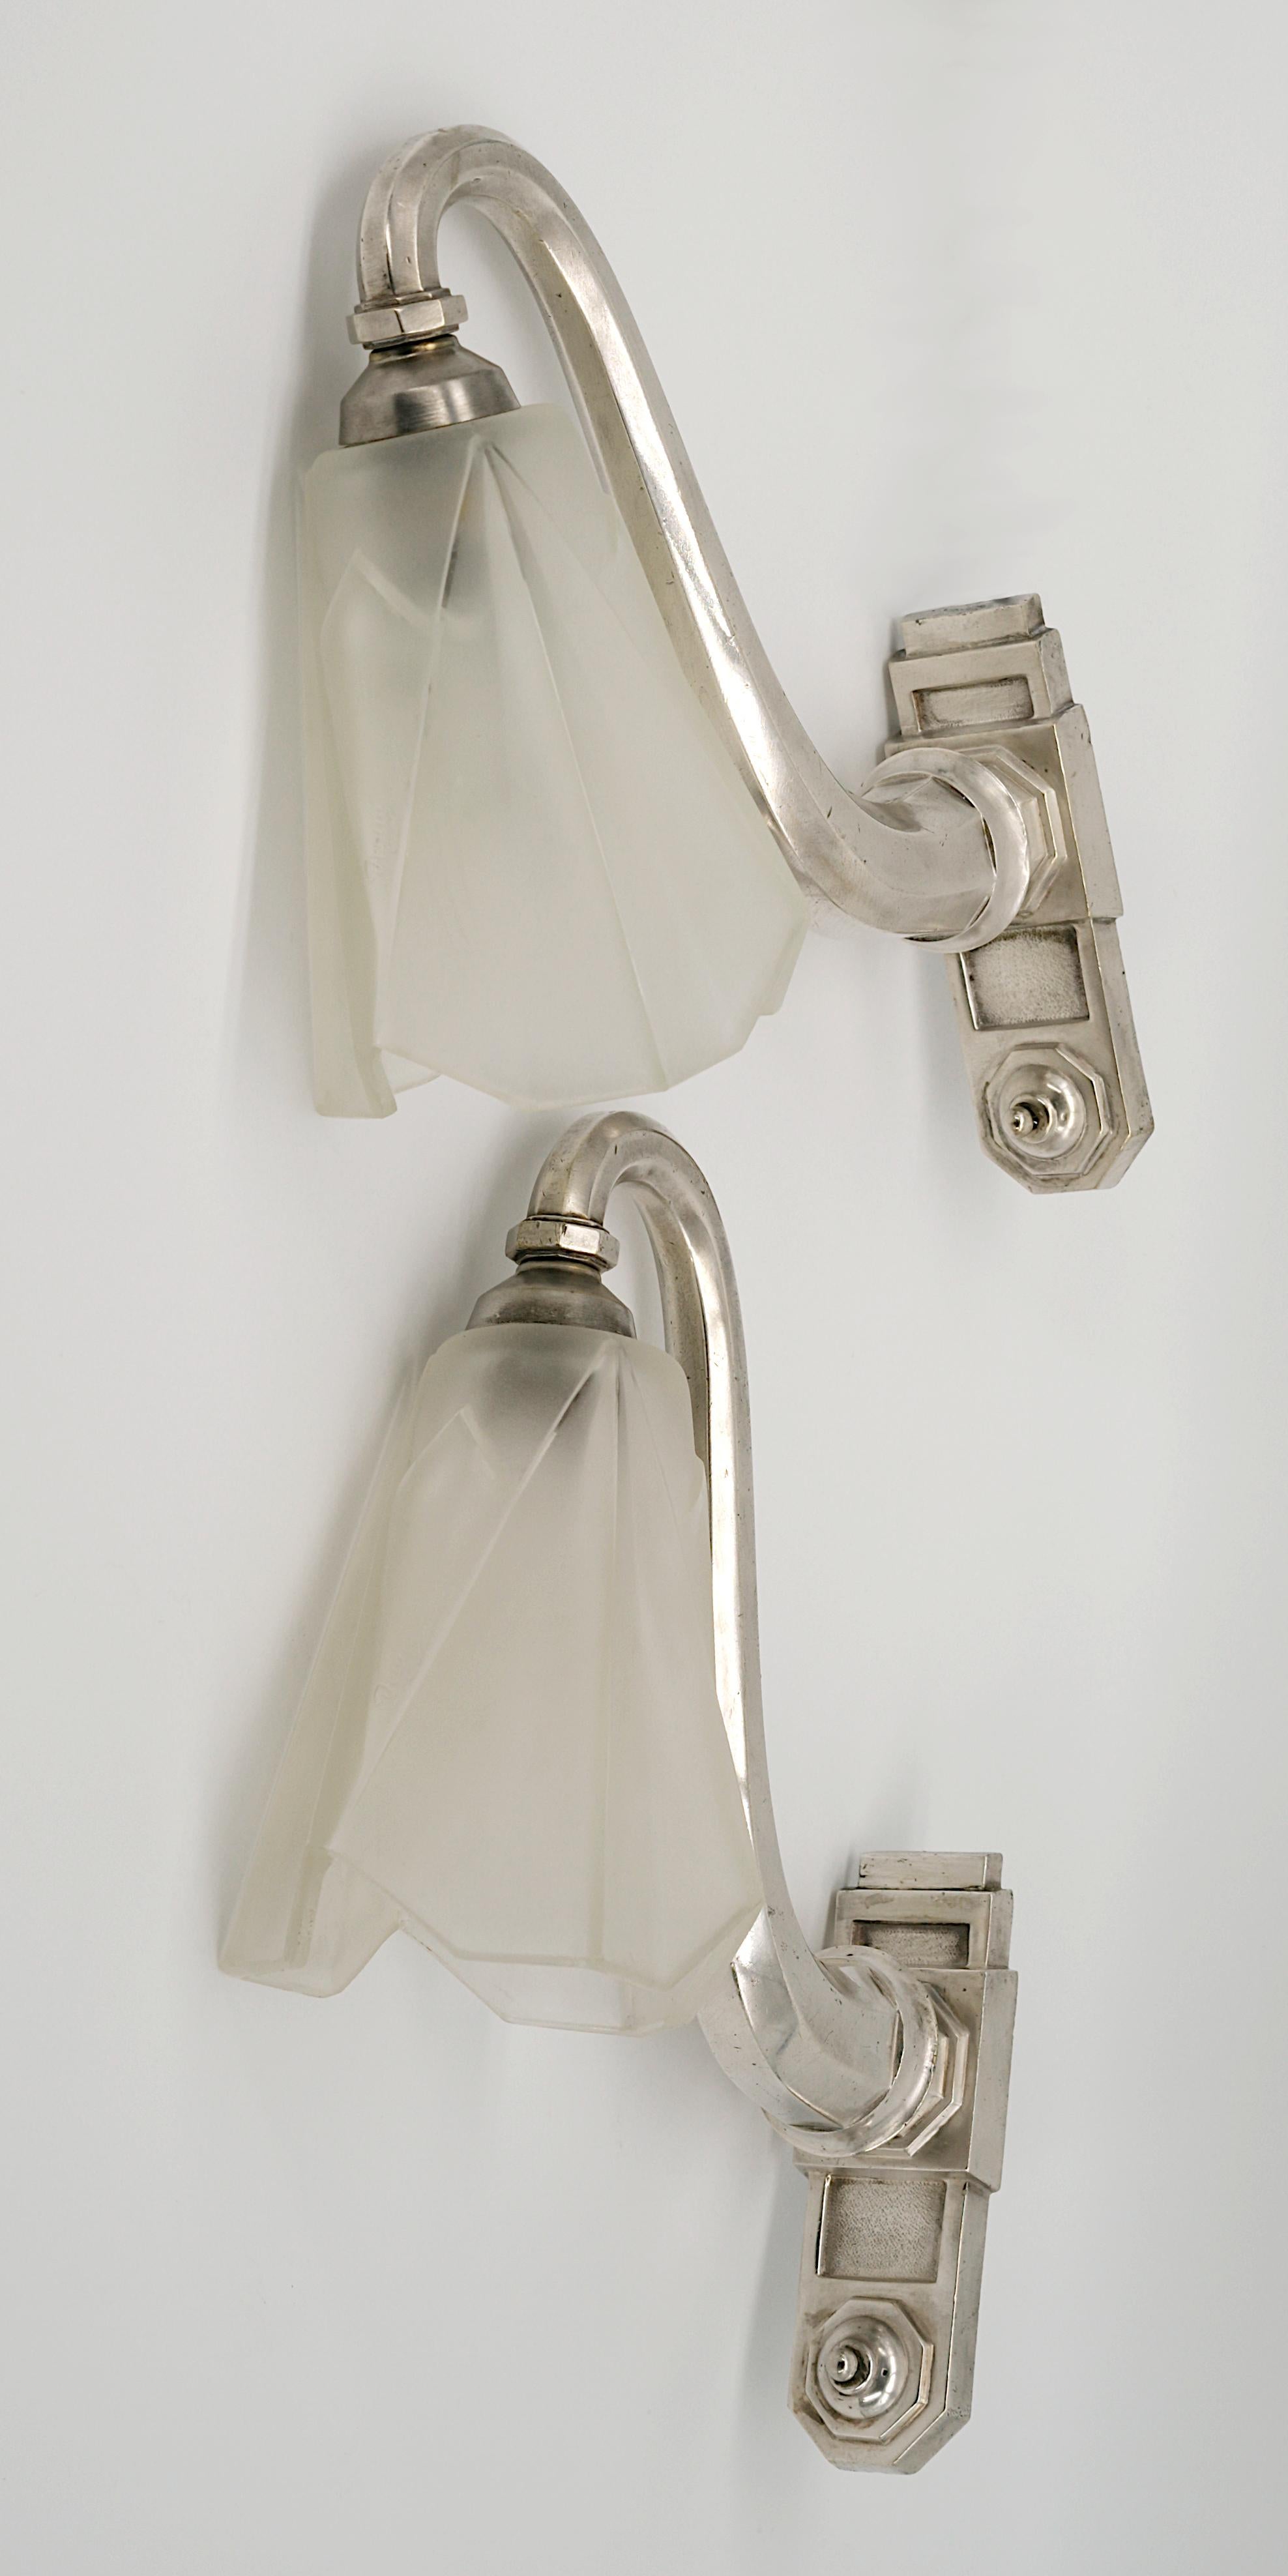 Degue French Art Deco Pair of Wall Sconces, circa 1930 In Good Condition For Sale In Saint-Amans-des-Cots, FR